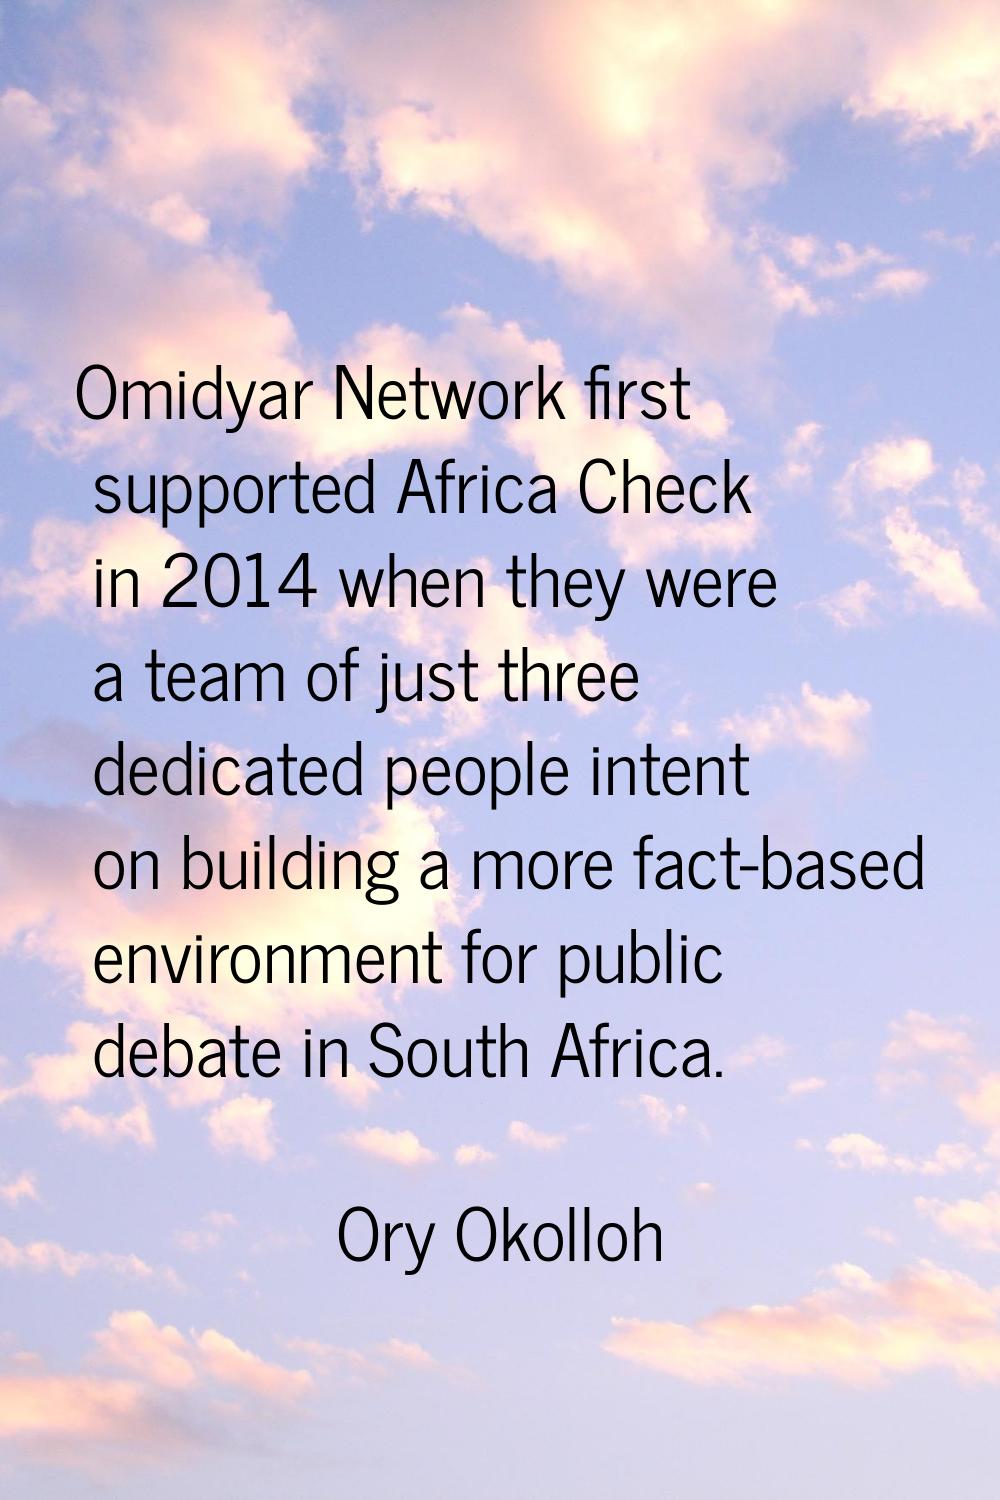 Omidyar Network first supported Africa Check in 2014 when they were a team of just three dedicated 